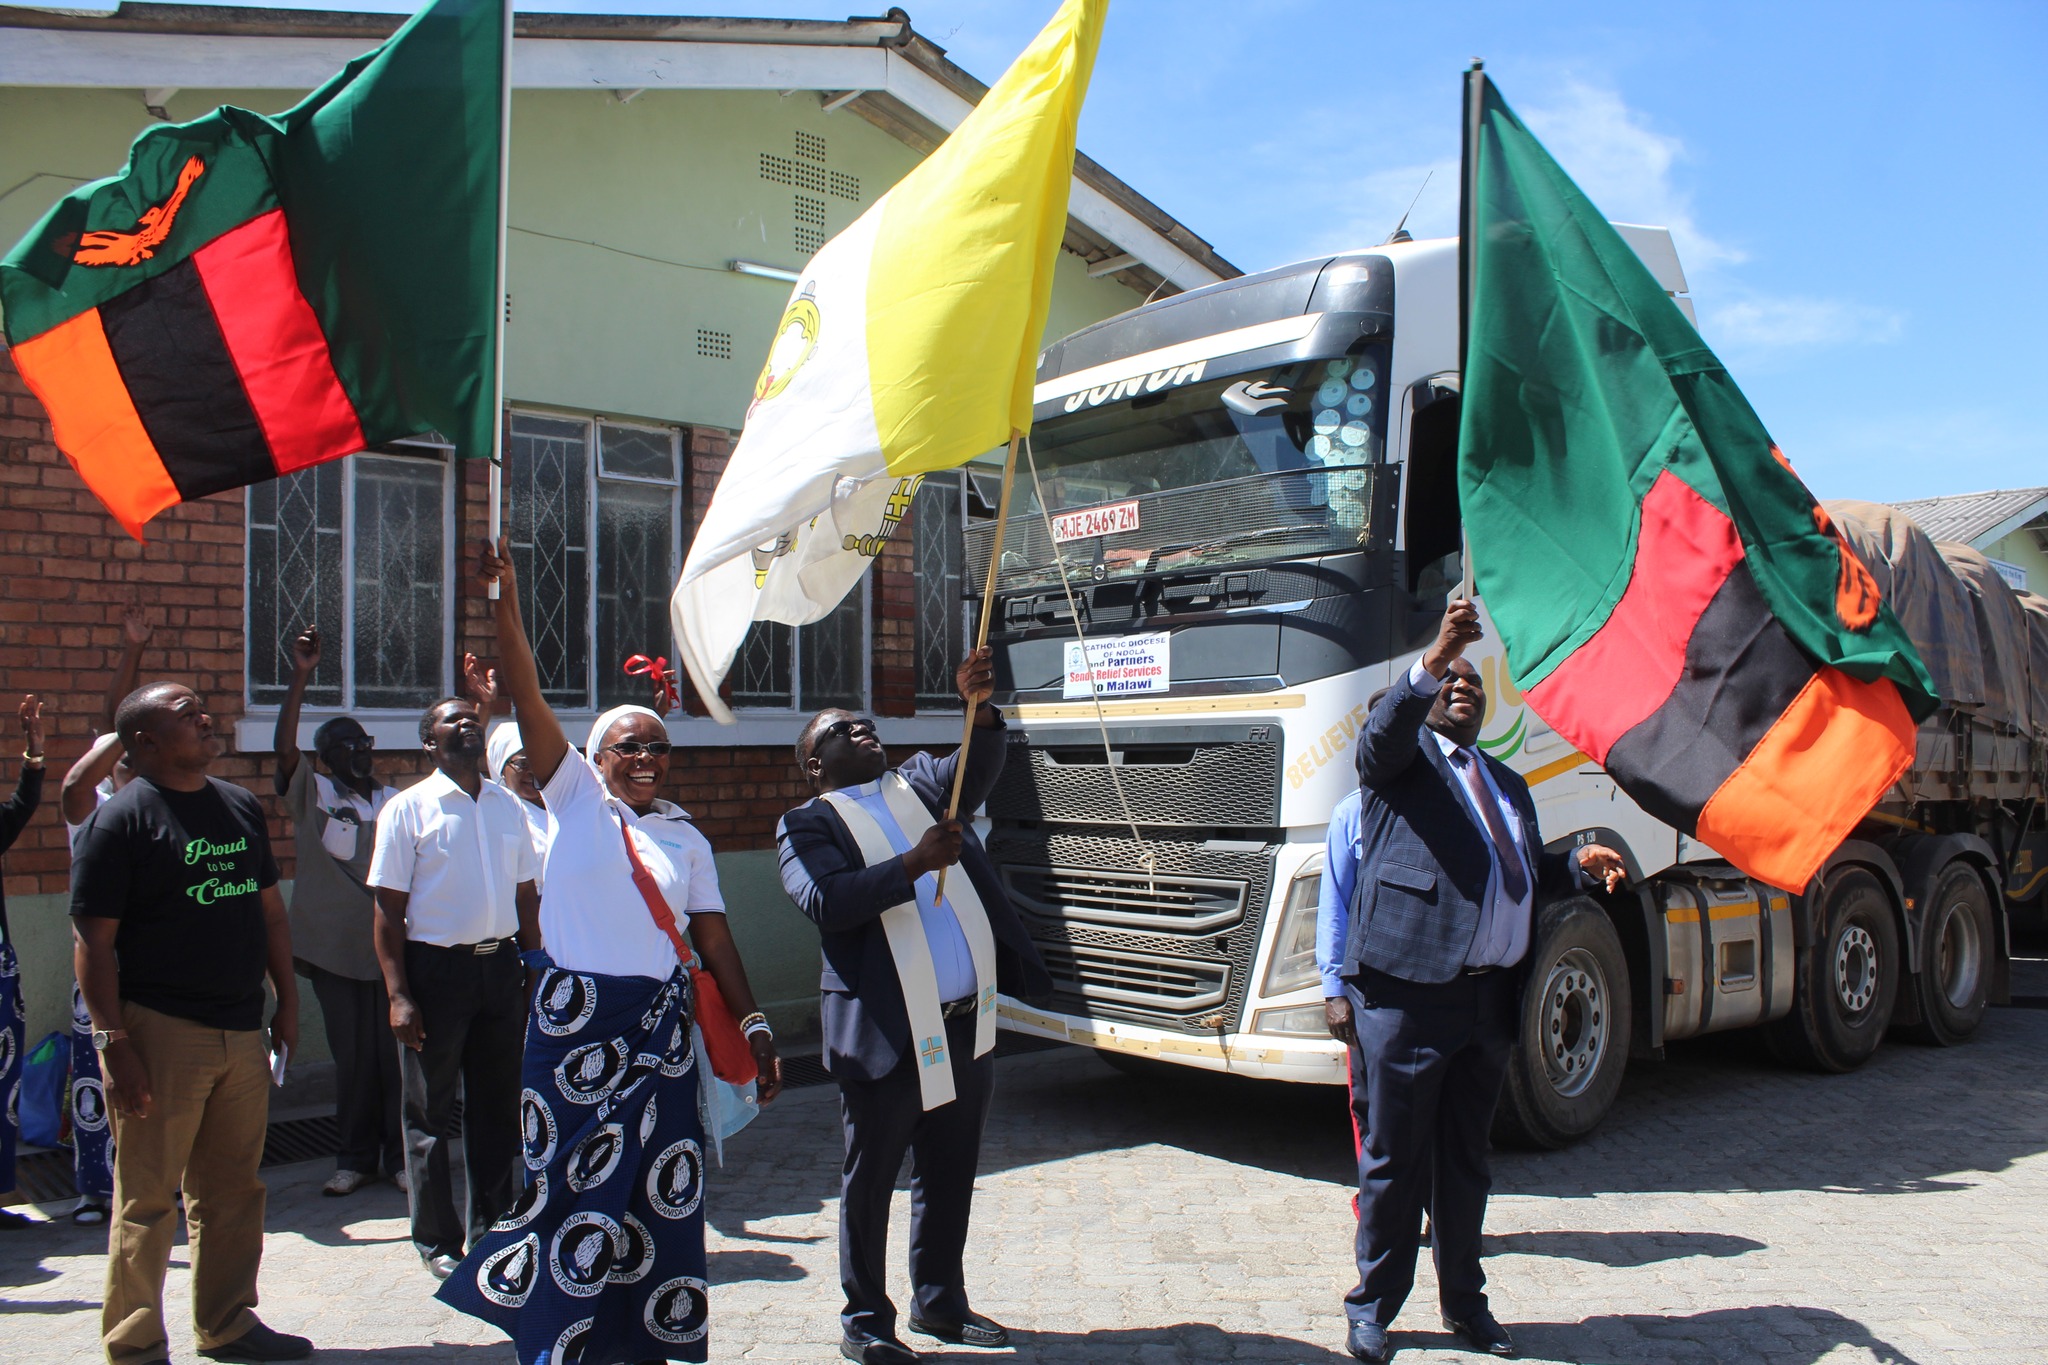 Journey to deliver donated goods to Malawi flagged off